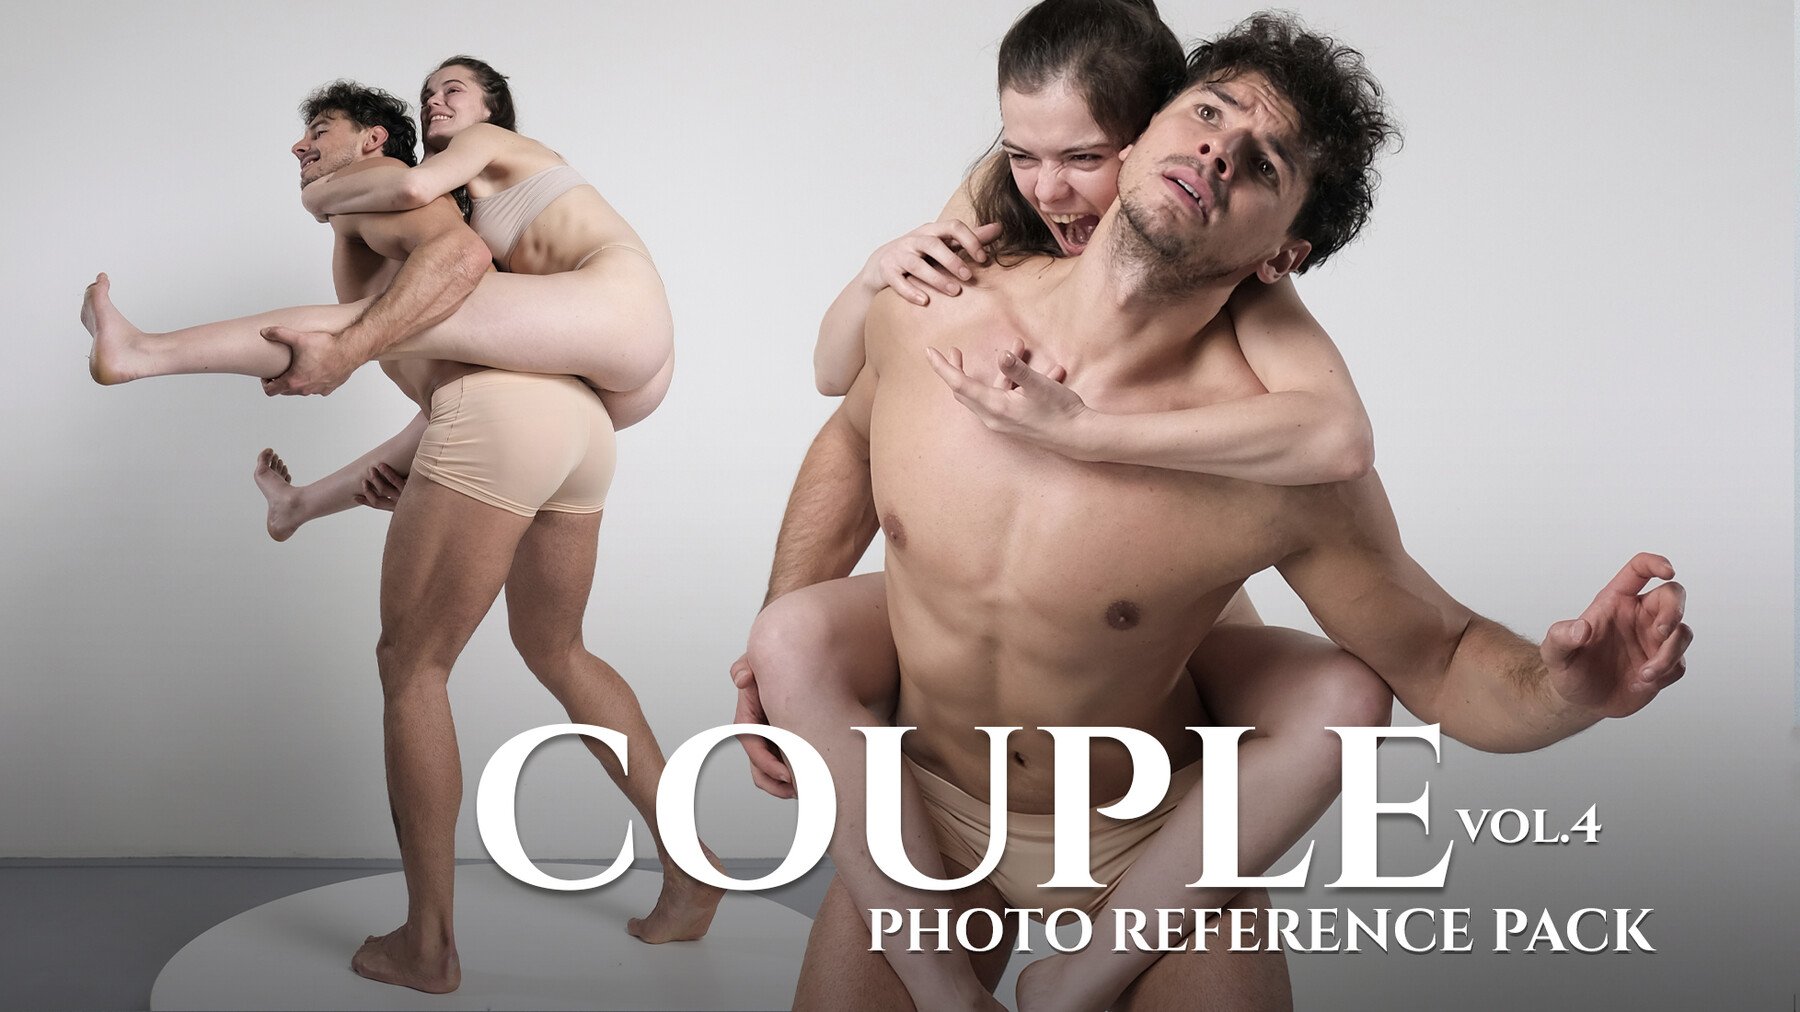 Couple Vol. 4 - Photo Reference Pack For Artists 831 JPEGs